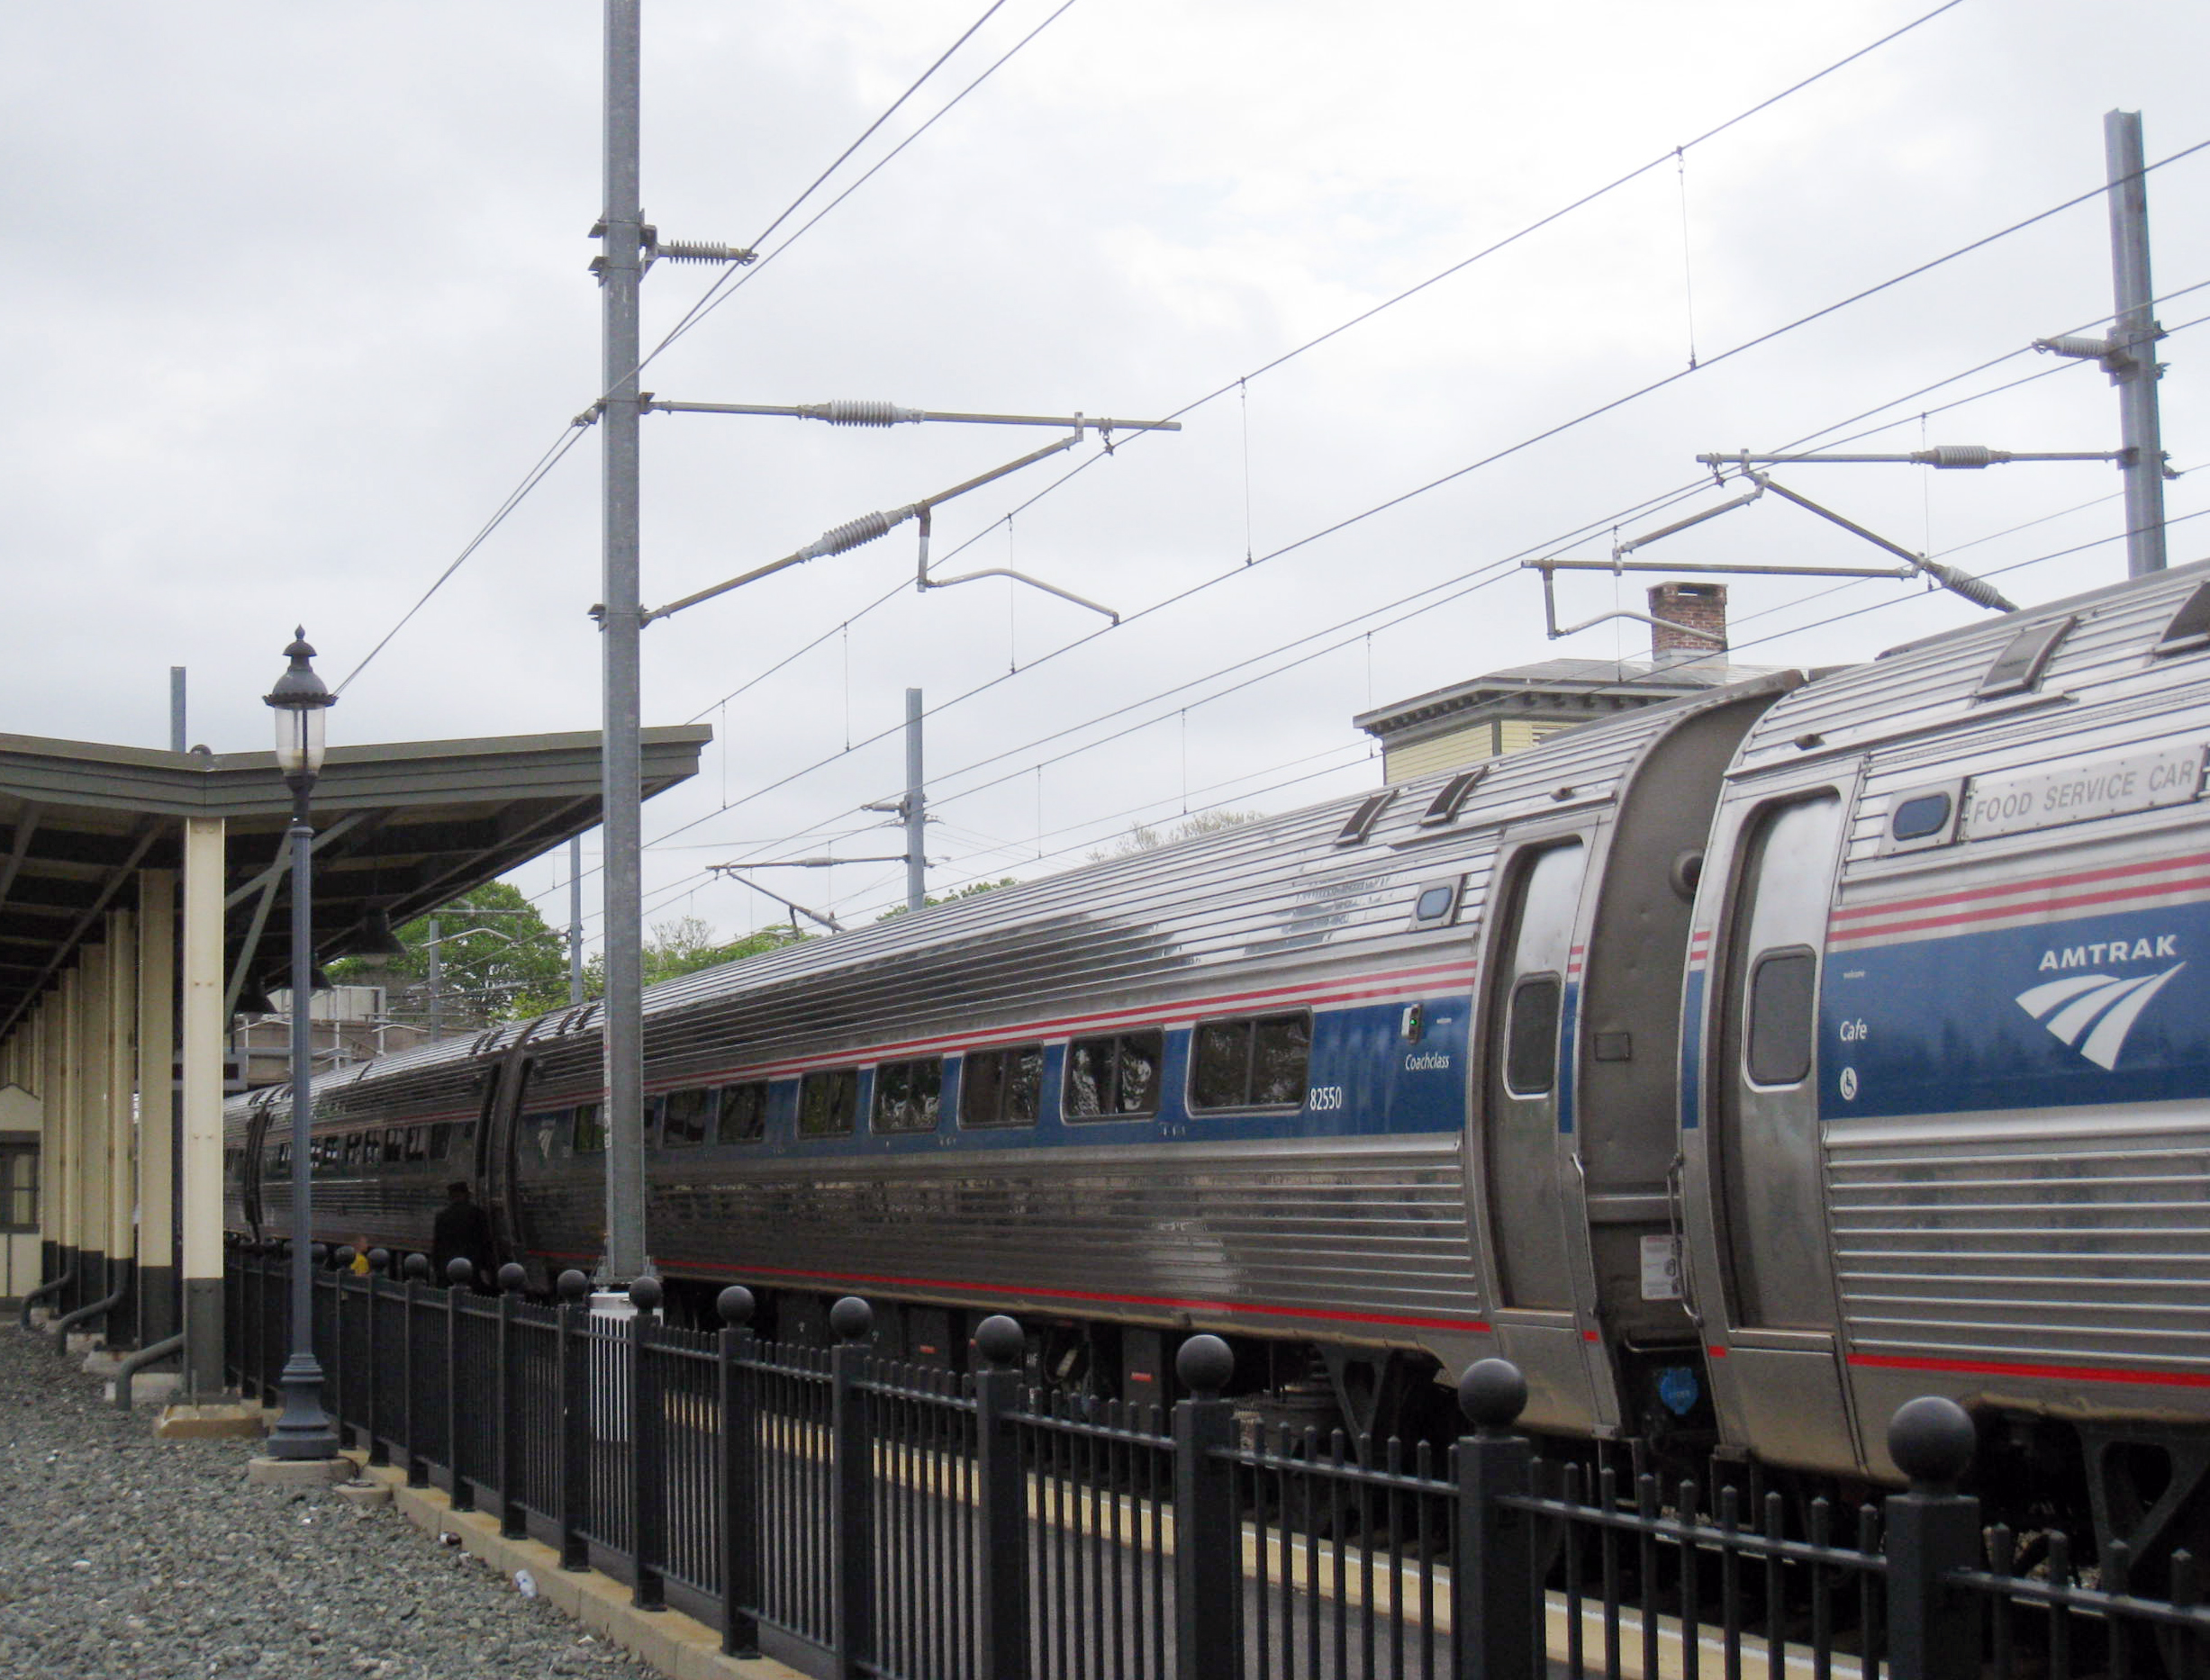 Electrification of the Northeast Corridor between New Haven and Boston included installation of catenary wire to carry the electrical current used to power the trains